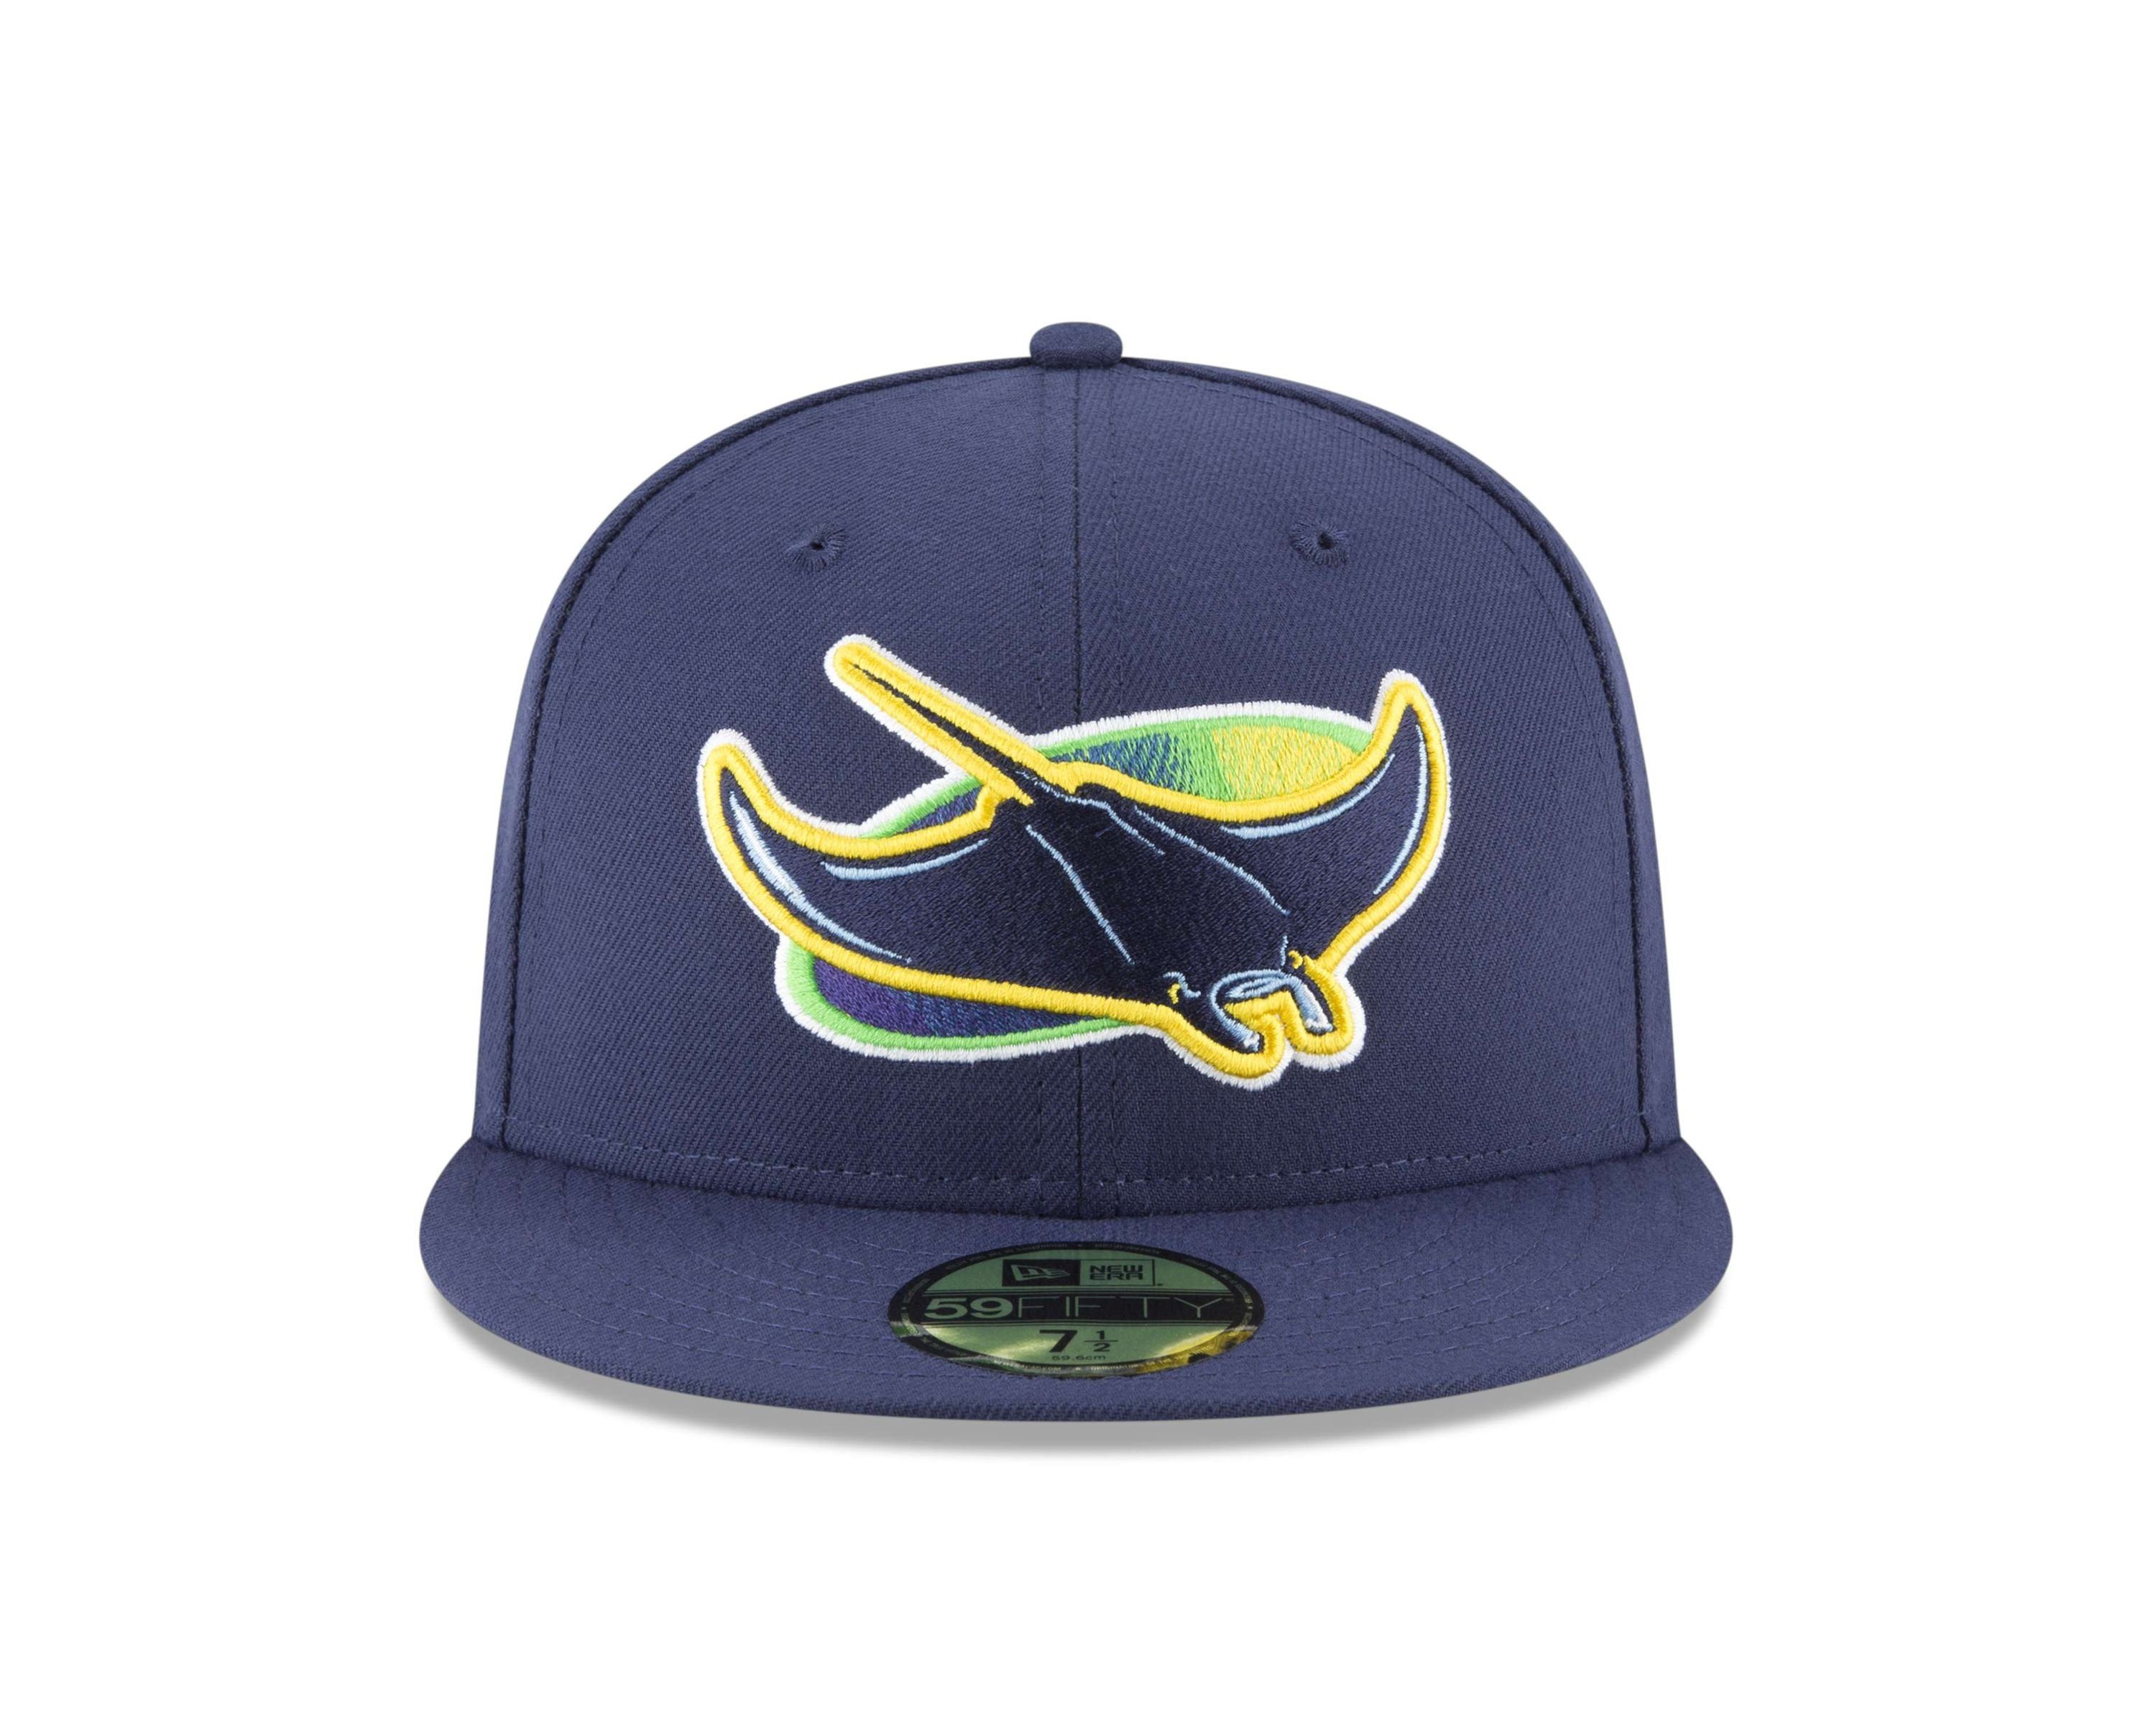 MLB Alternate Rays Tampa New Fitted Cap Authentic Era Collection Bay